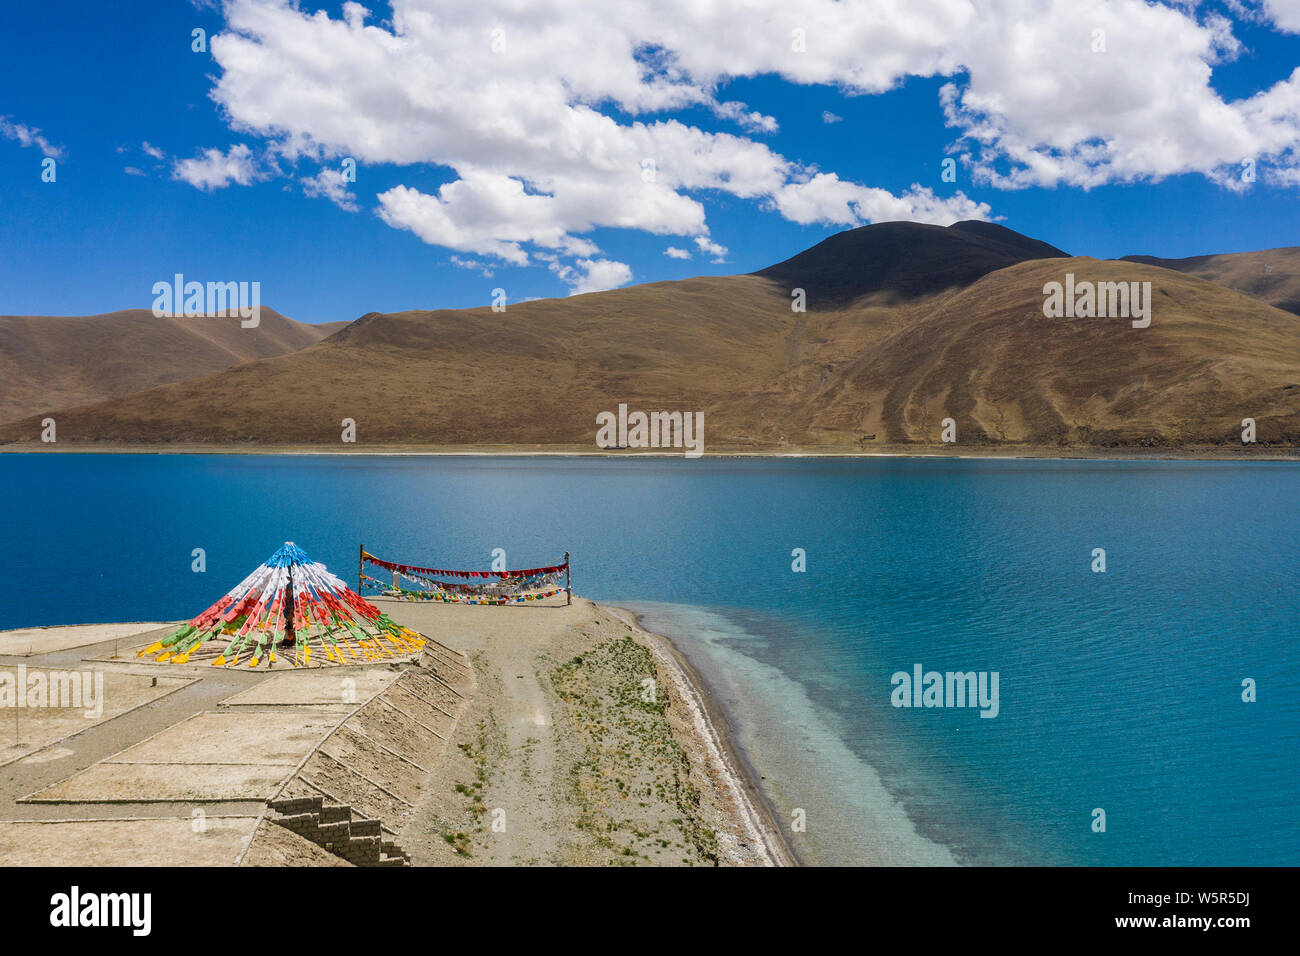 Landscape of the Yamdrok Lake, one of the Three Holiest Lakes in Tibet, in Nagarze county, Shannan city, northwest China's Tibet Autonomous Region, 14 Stock Photo